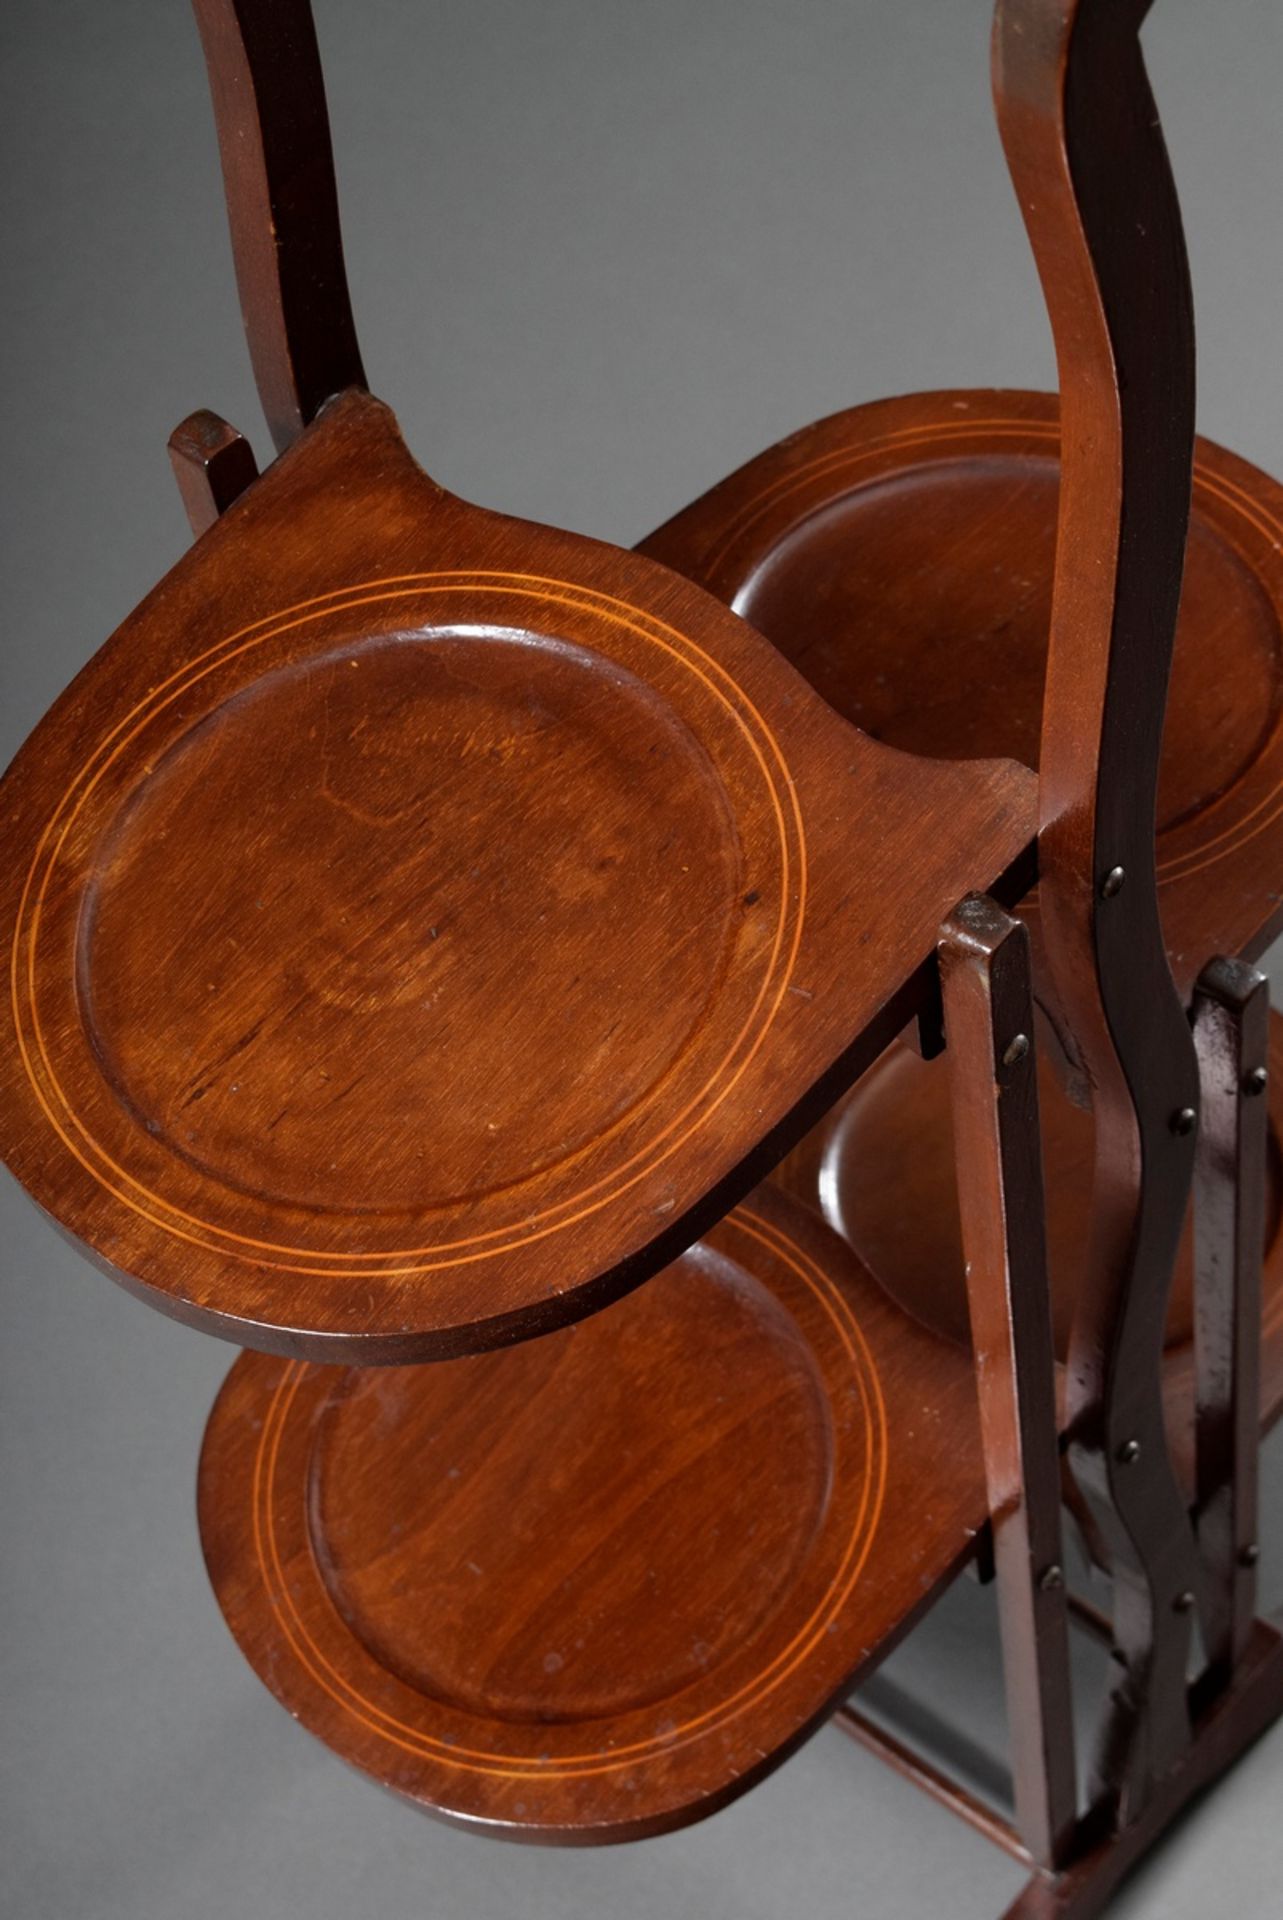 Mahogany cakestand with ribbon inlays, turned frame and two folding plate stands on each side, c. 1 - Image 3 of 4